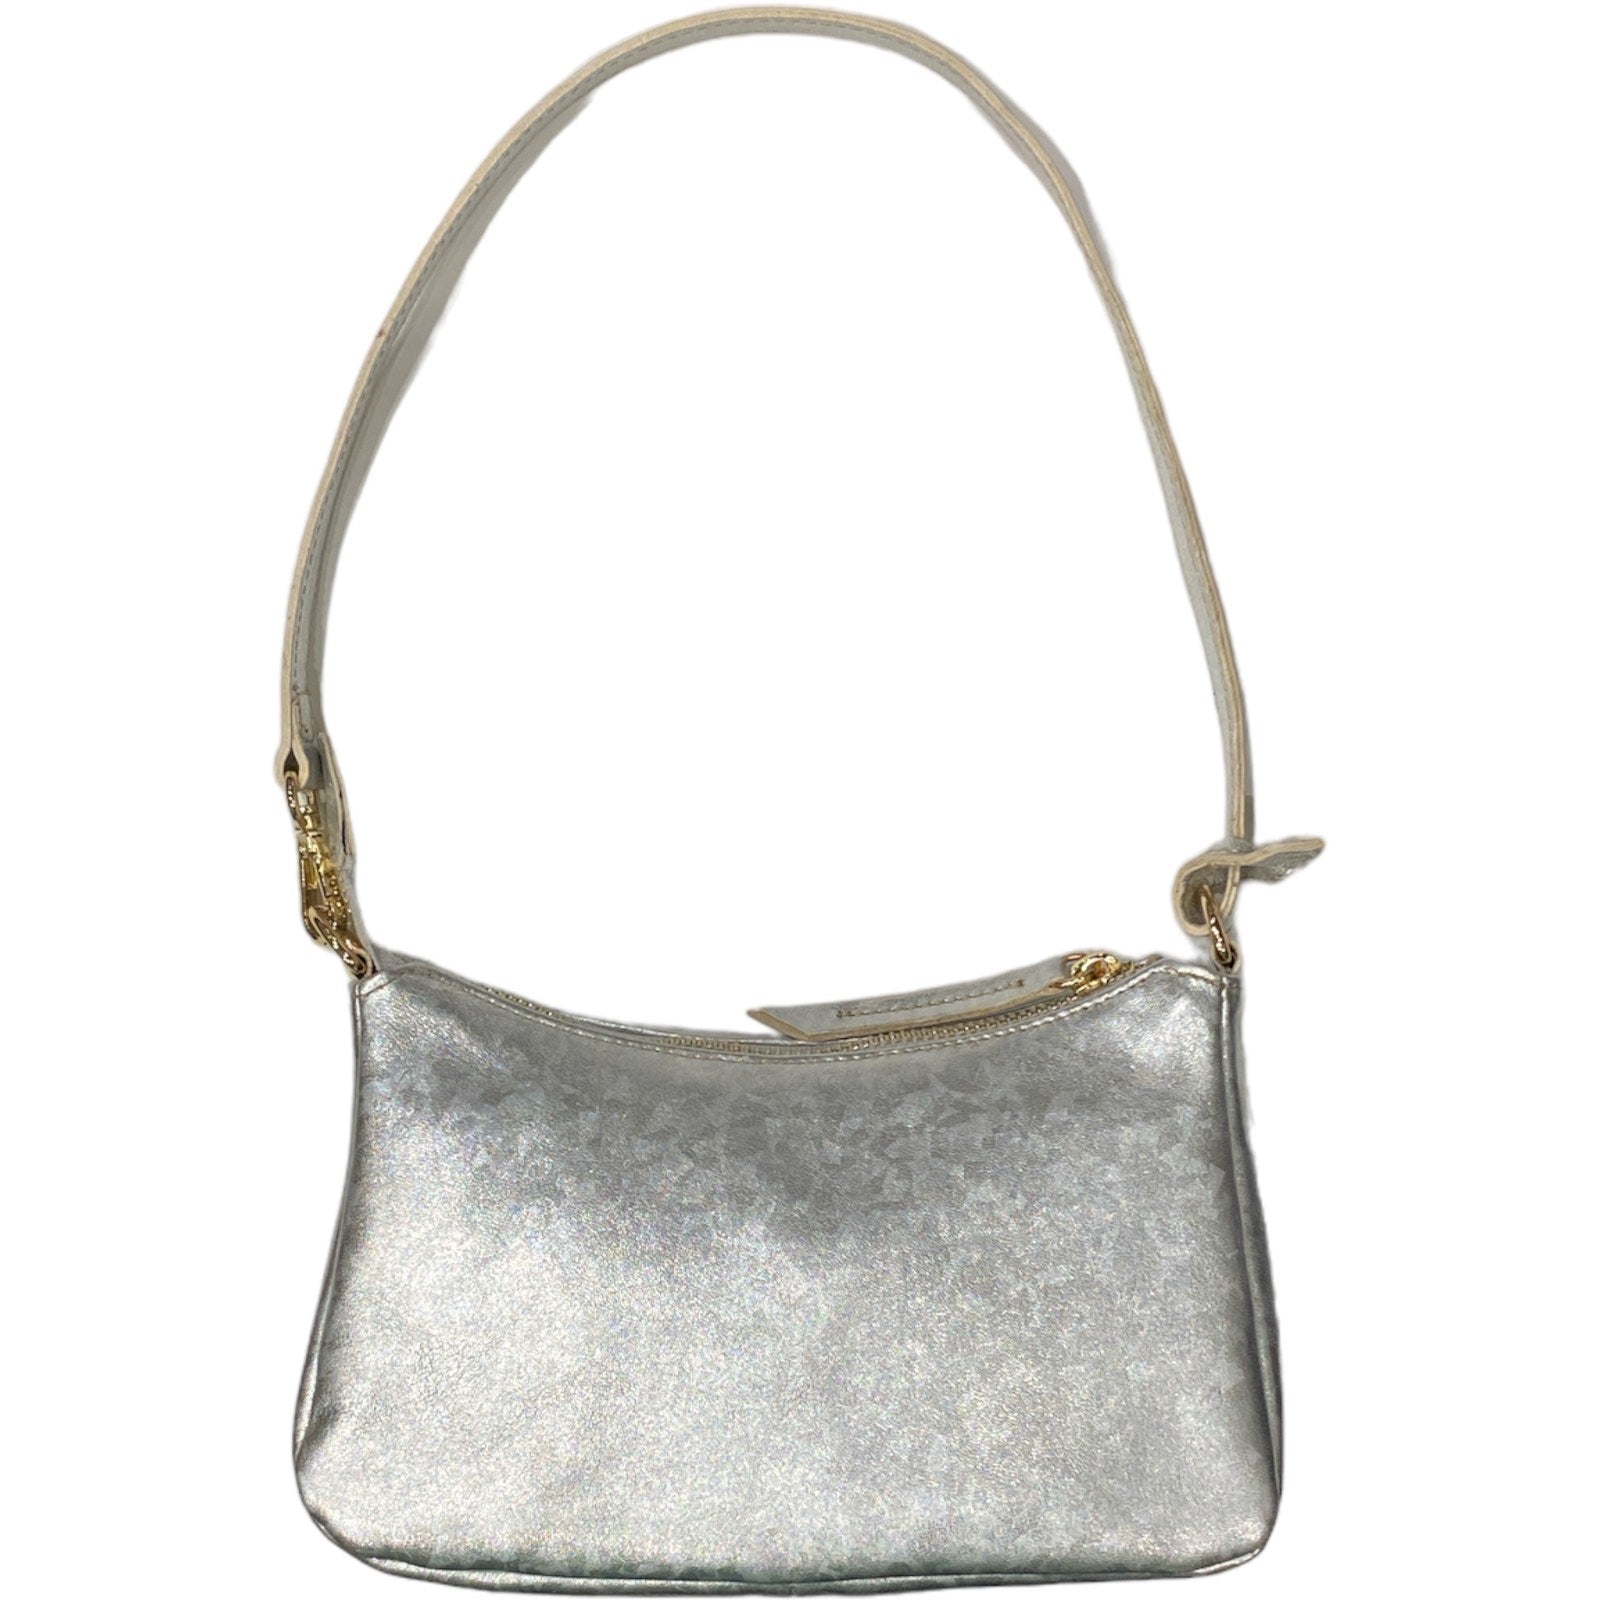 Natalie Small. Silver leather evening bag